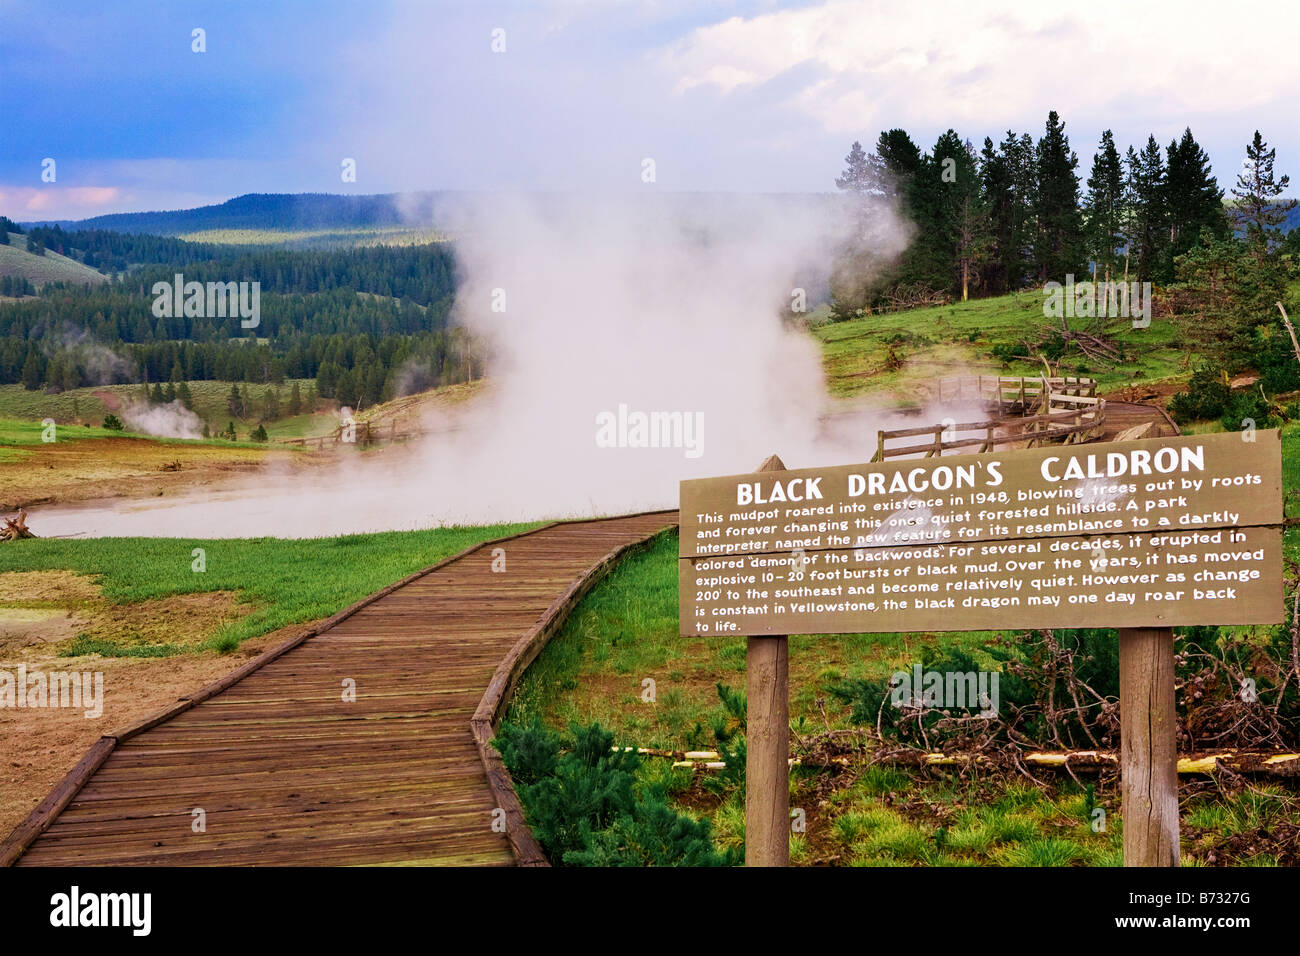 Image of Black Dragons Caldron and its informational sign in Yellowstone National Park Stock Photo